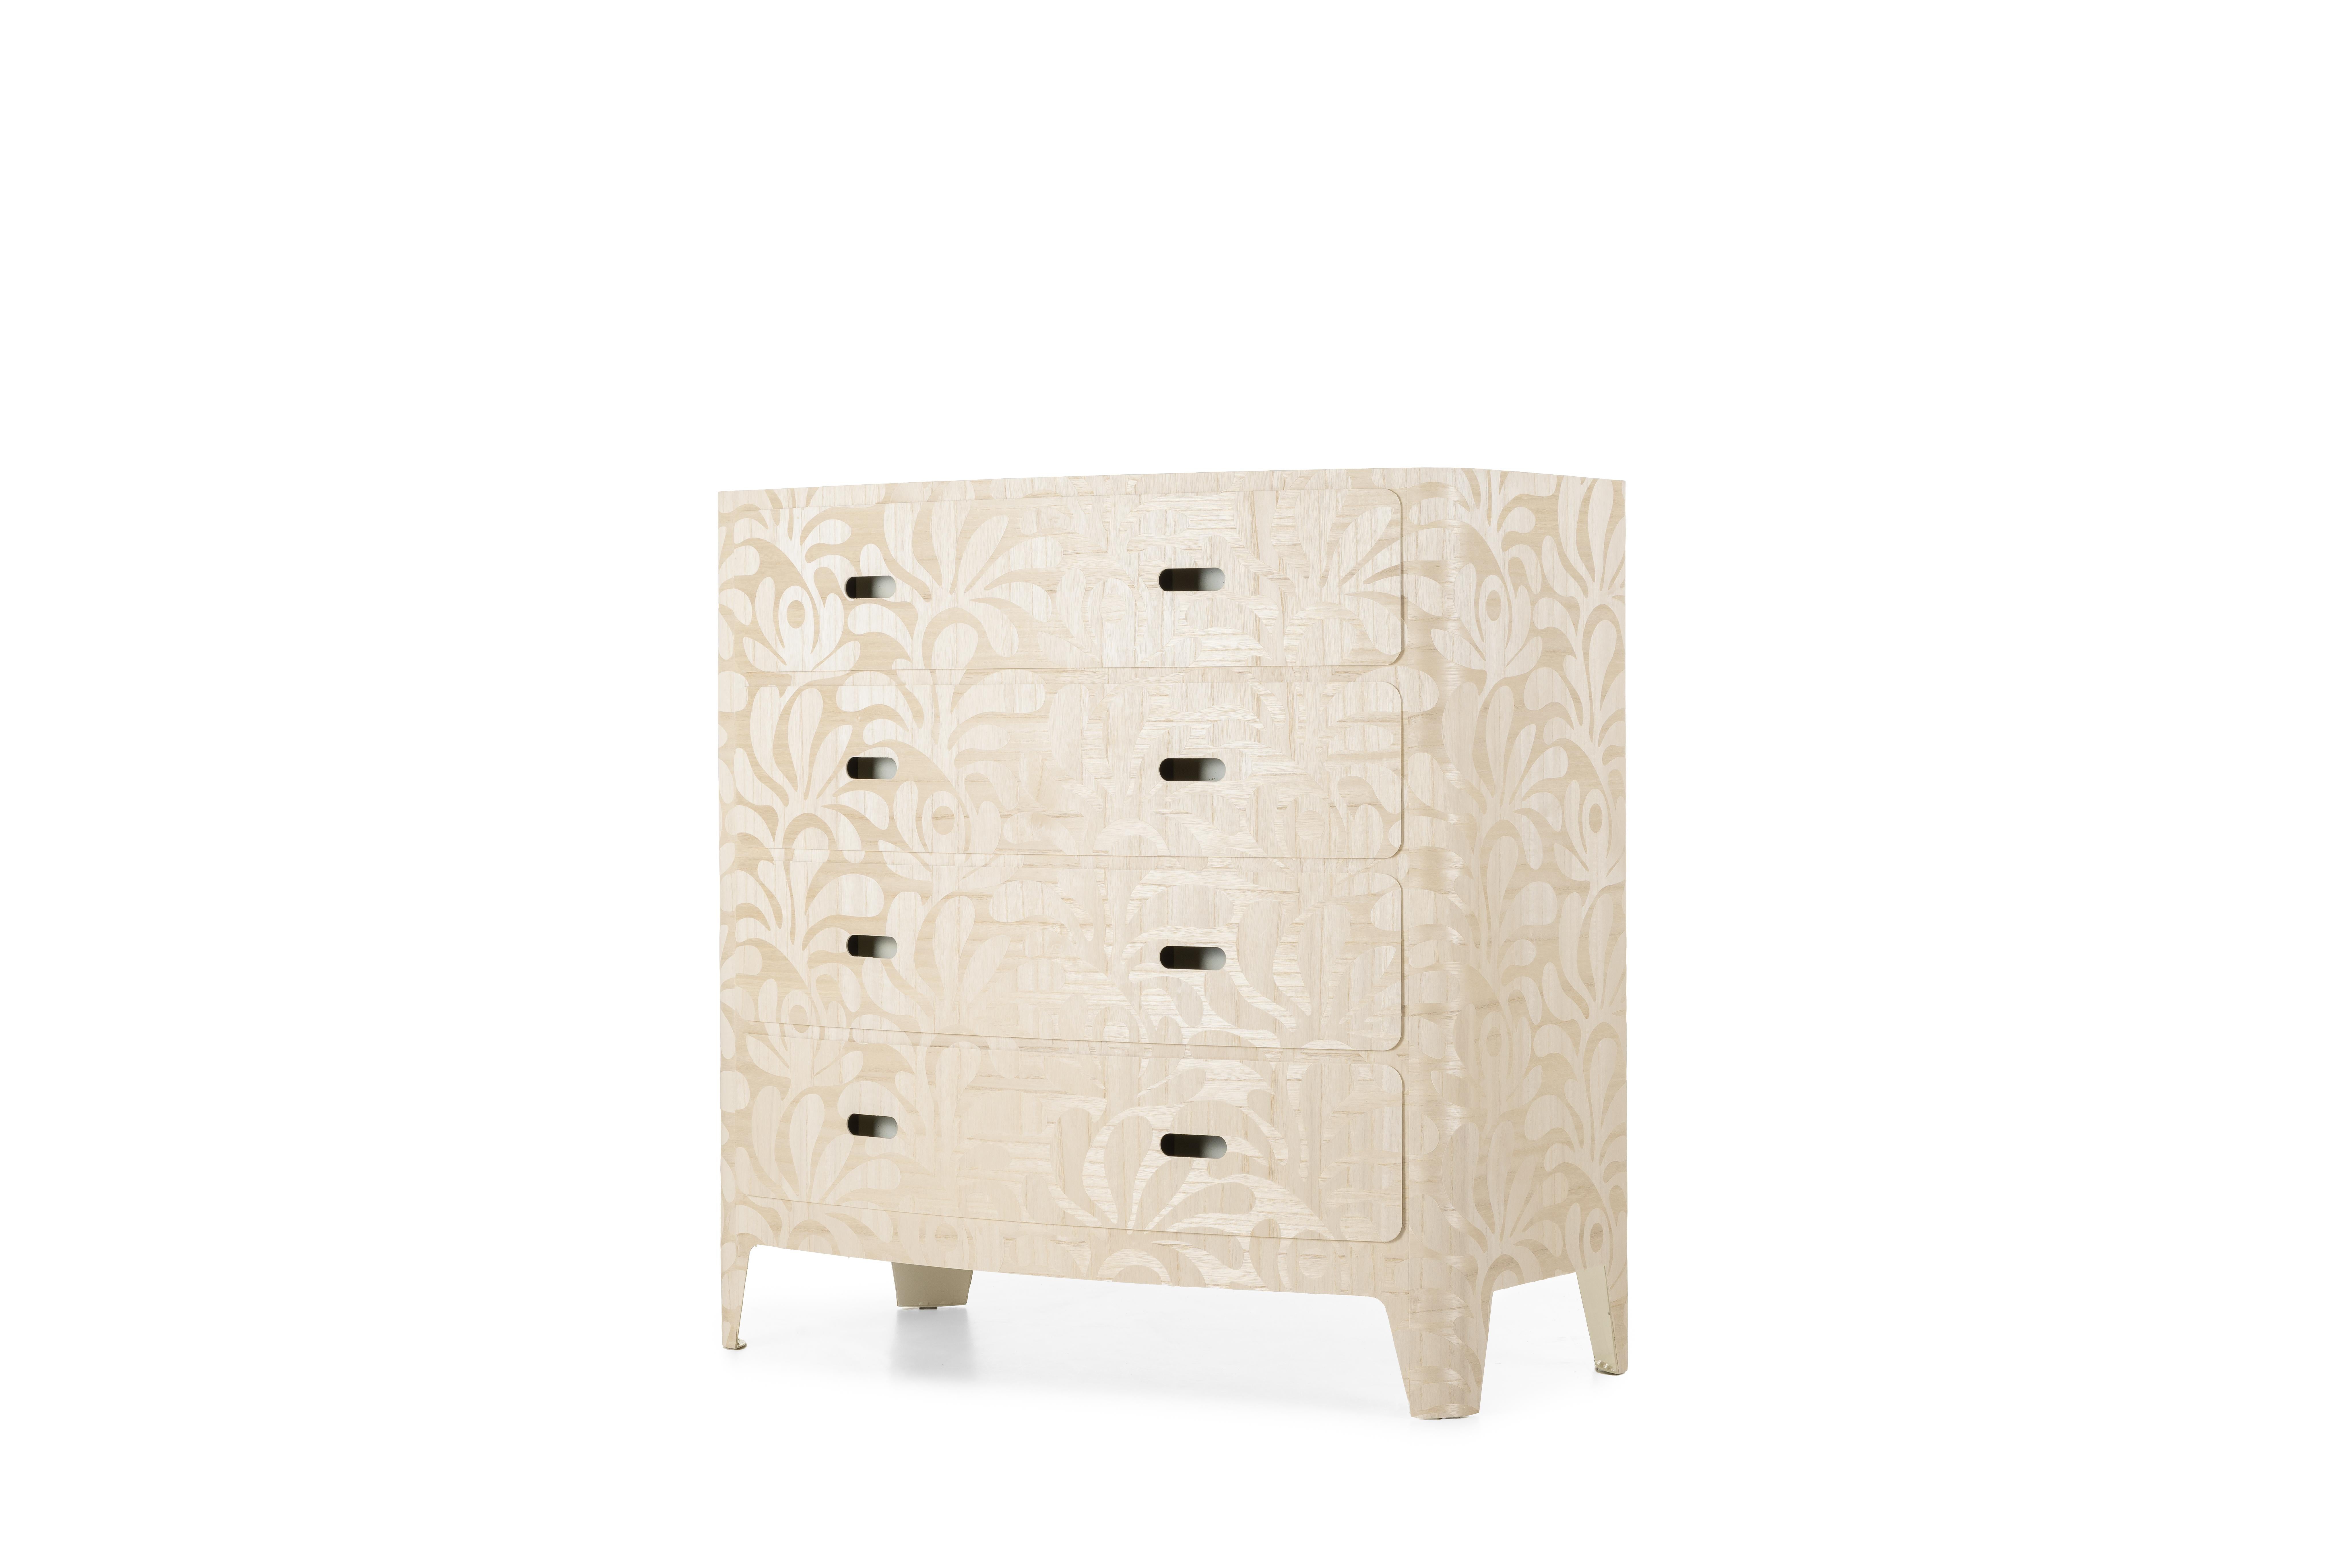 Contemporary Moooi Editions, Eek Dresser Woodblock Beetle Fern, Limited #1/10 For Sale